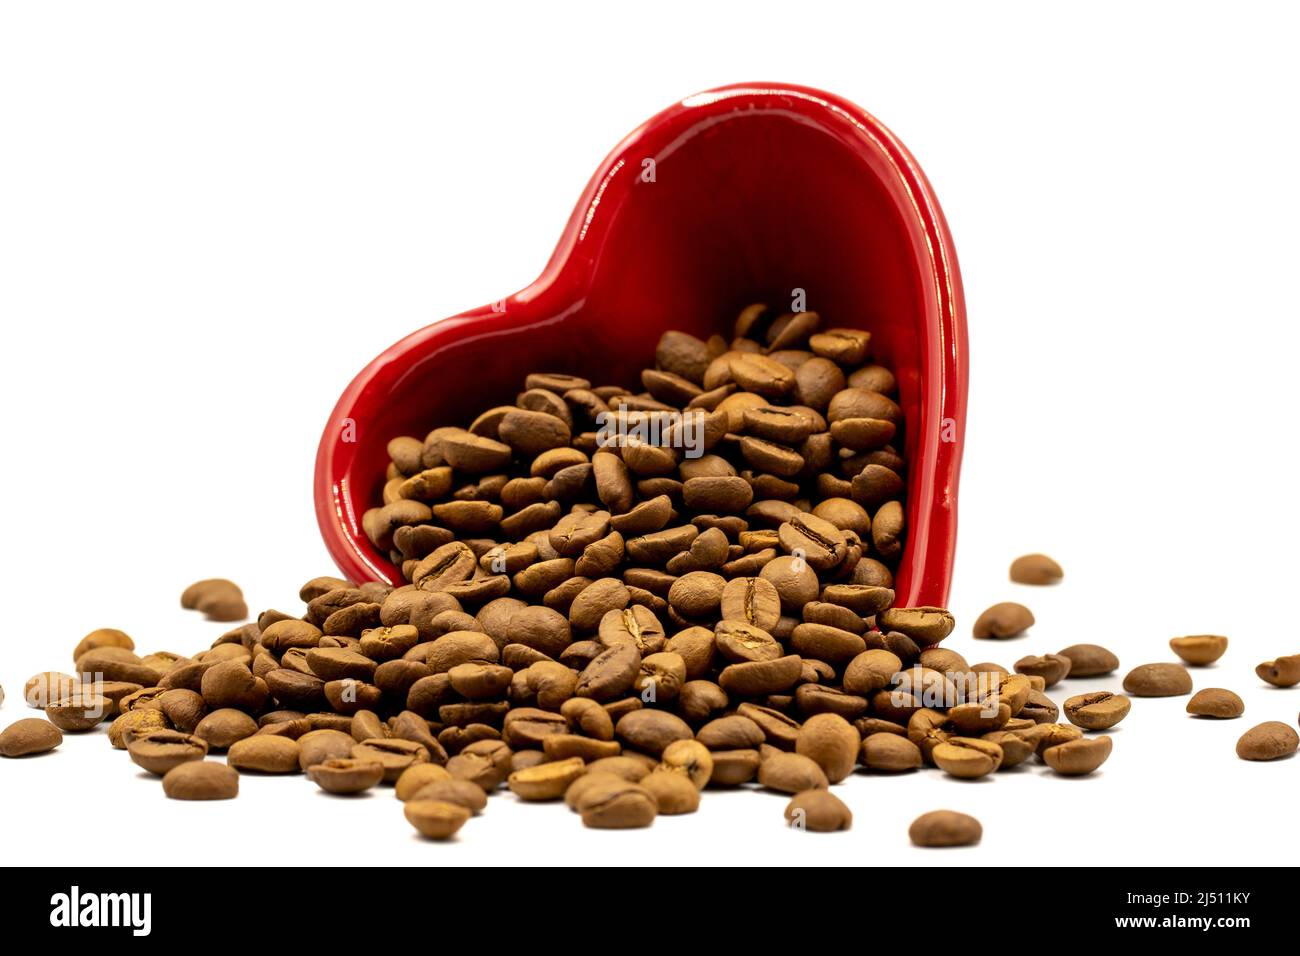 Coffee beans isolated on a white background. Full of coffee beans in a heart shaped plate. Close-up. Stock Photo